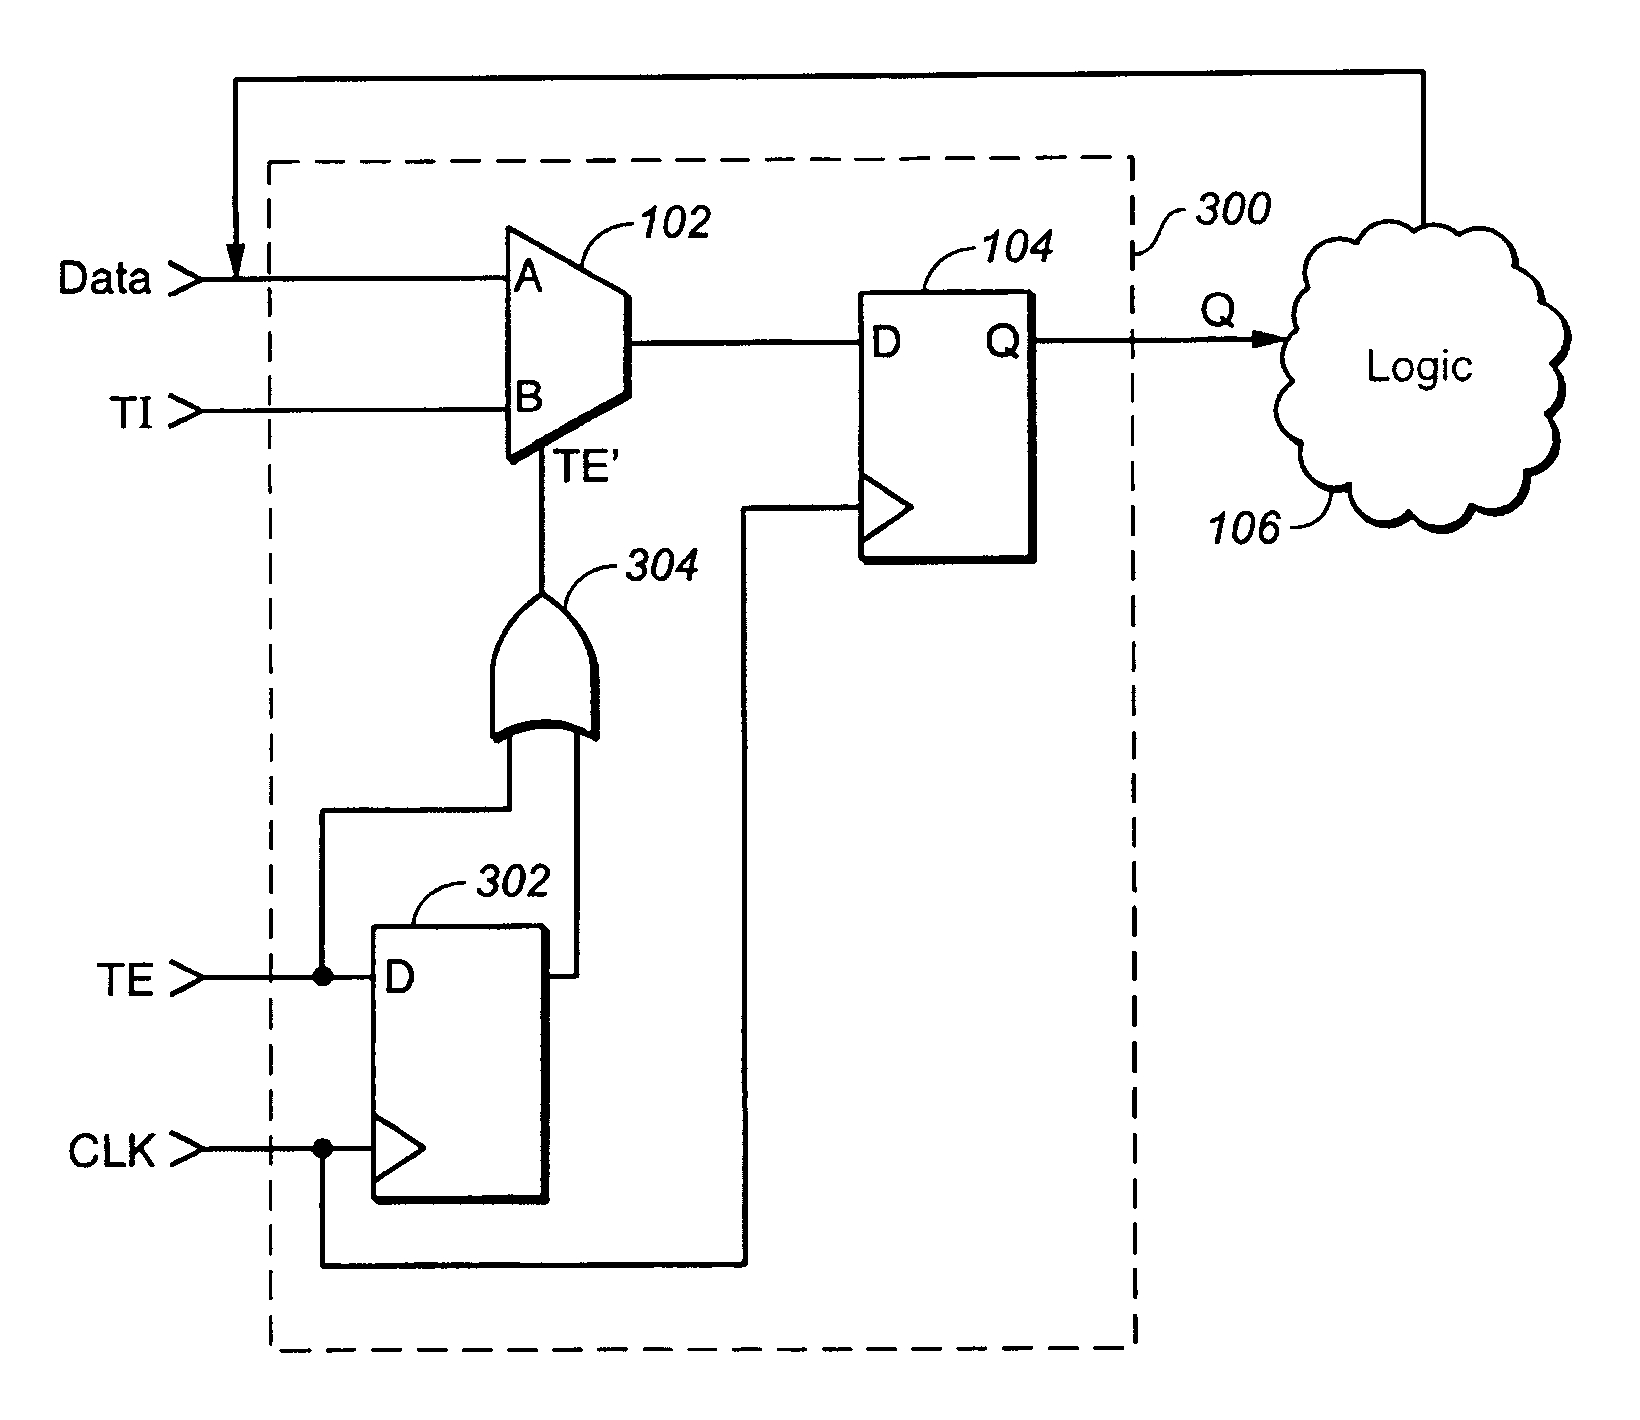 Self-timed scan circuit for ASIC fault testing